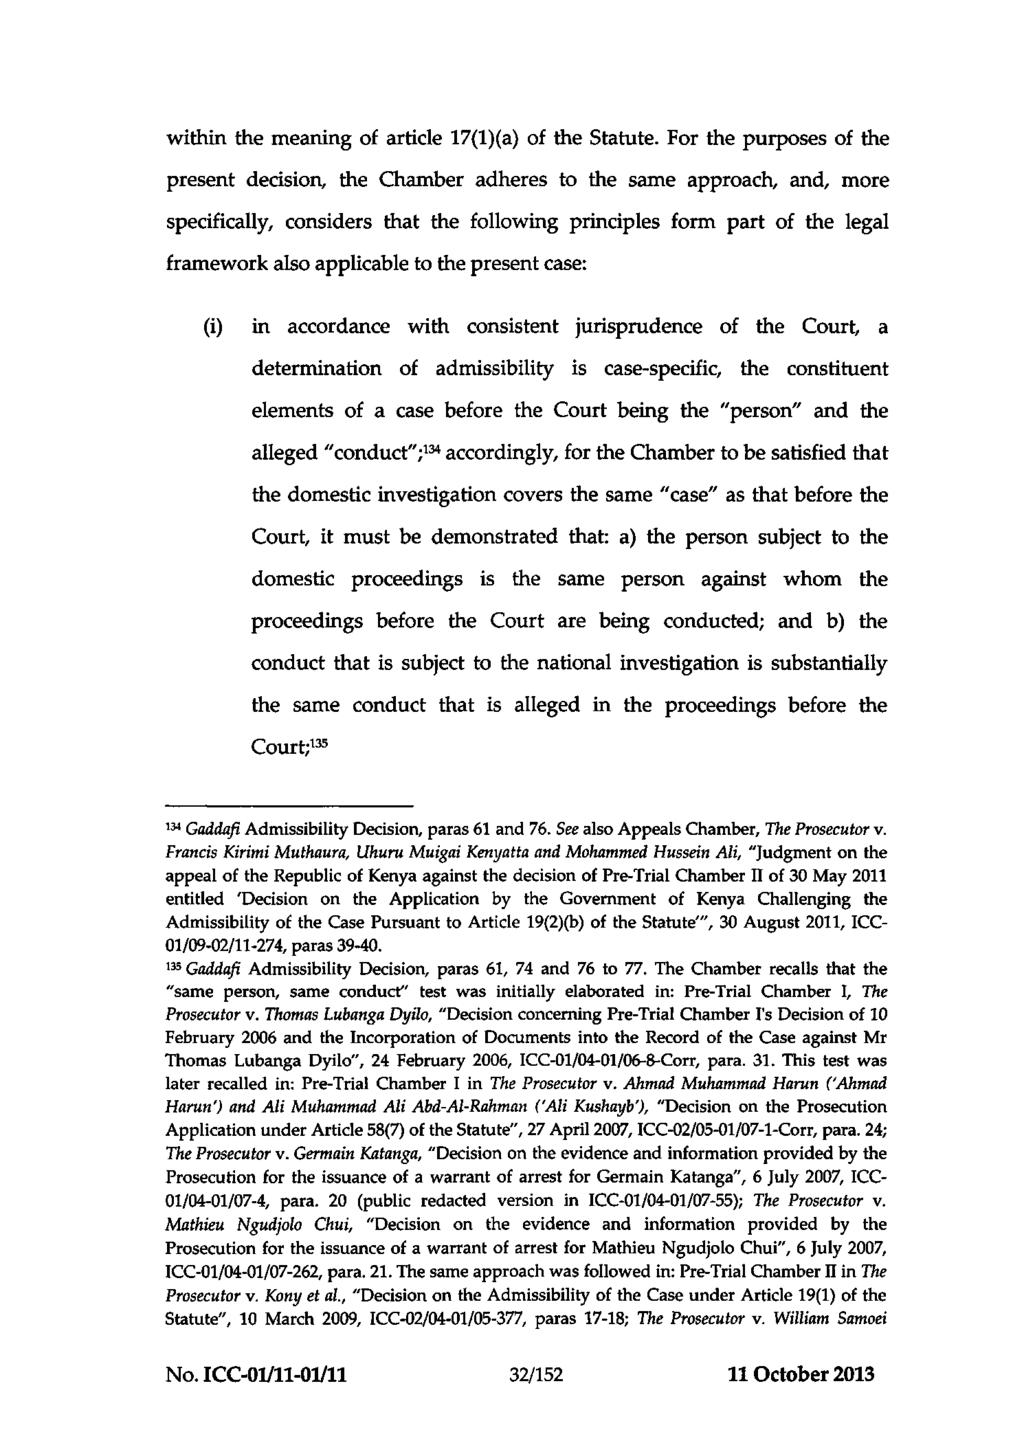 ICC-01/11-01/11-466-Red 11-10-2013 32/152 NM PT within the meaning of article 17(l)(a) of the Statute.